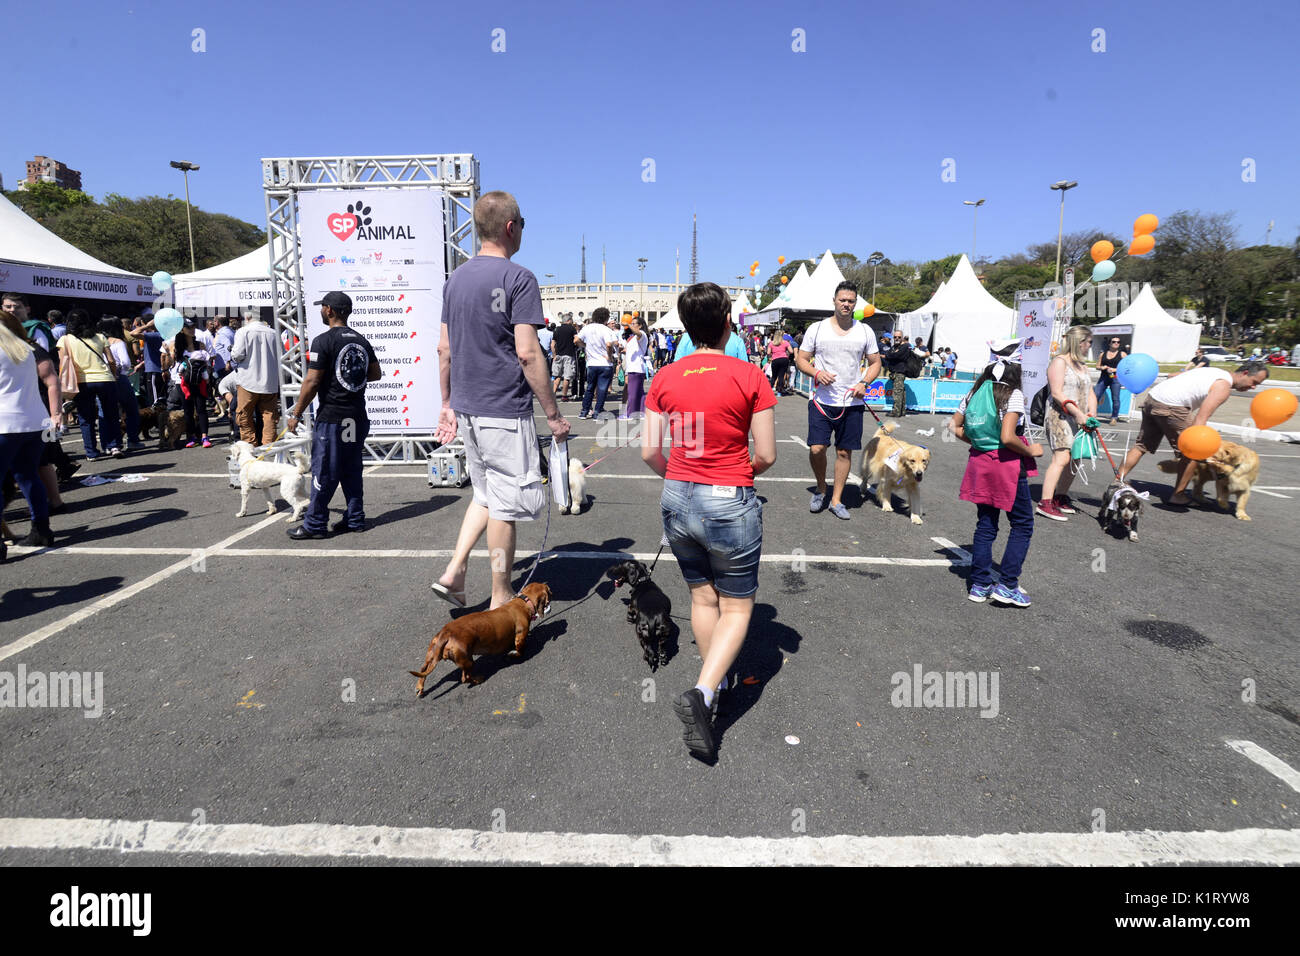 Sao Paulo, Brazil. 27th August, 2017.Several families took their pets on Sunday (27) to participate in the SP Animal event, in Charles Miller Square, West Zone of Sao Paulo.Organized by the City of Sao Paulo and by partner companies, the space had different services and activities Welfare of animals. The actions mark the vaccination campaign against rabies in the municipality. Credit: Cris Faga/ZUMA Wire/Alamy Live News Stock Photo